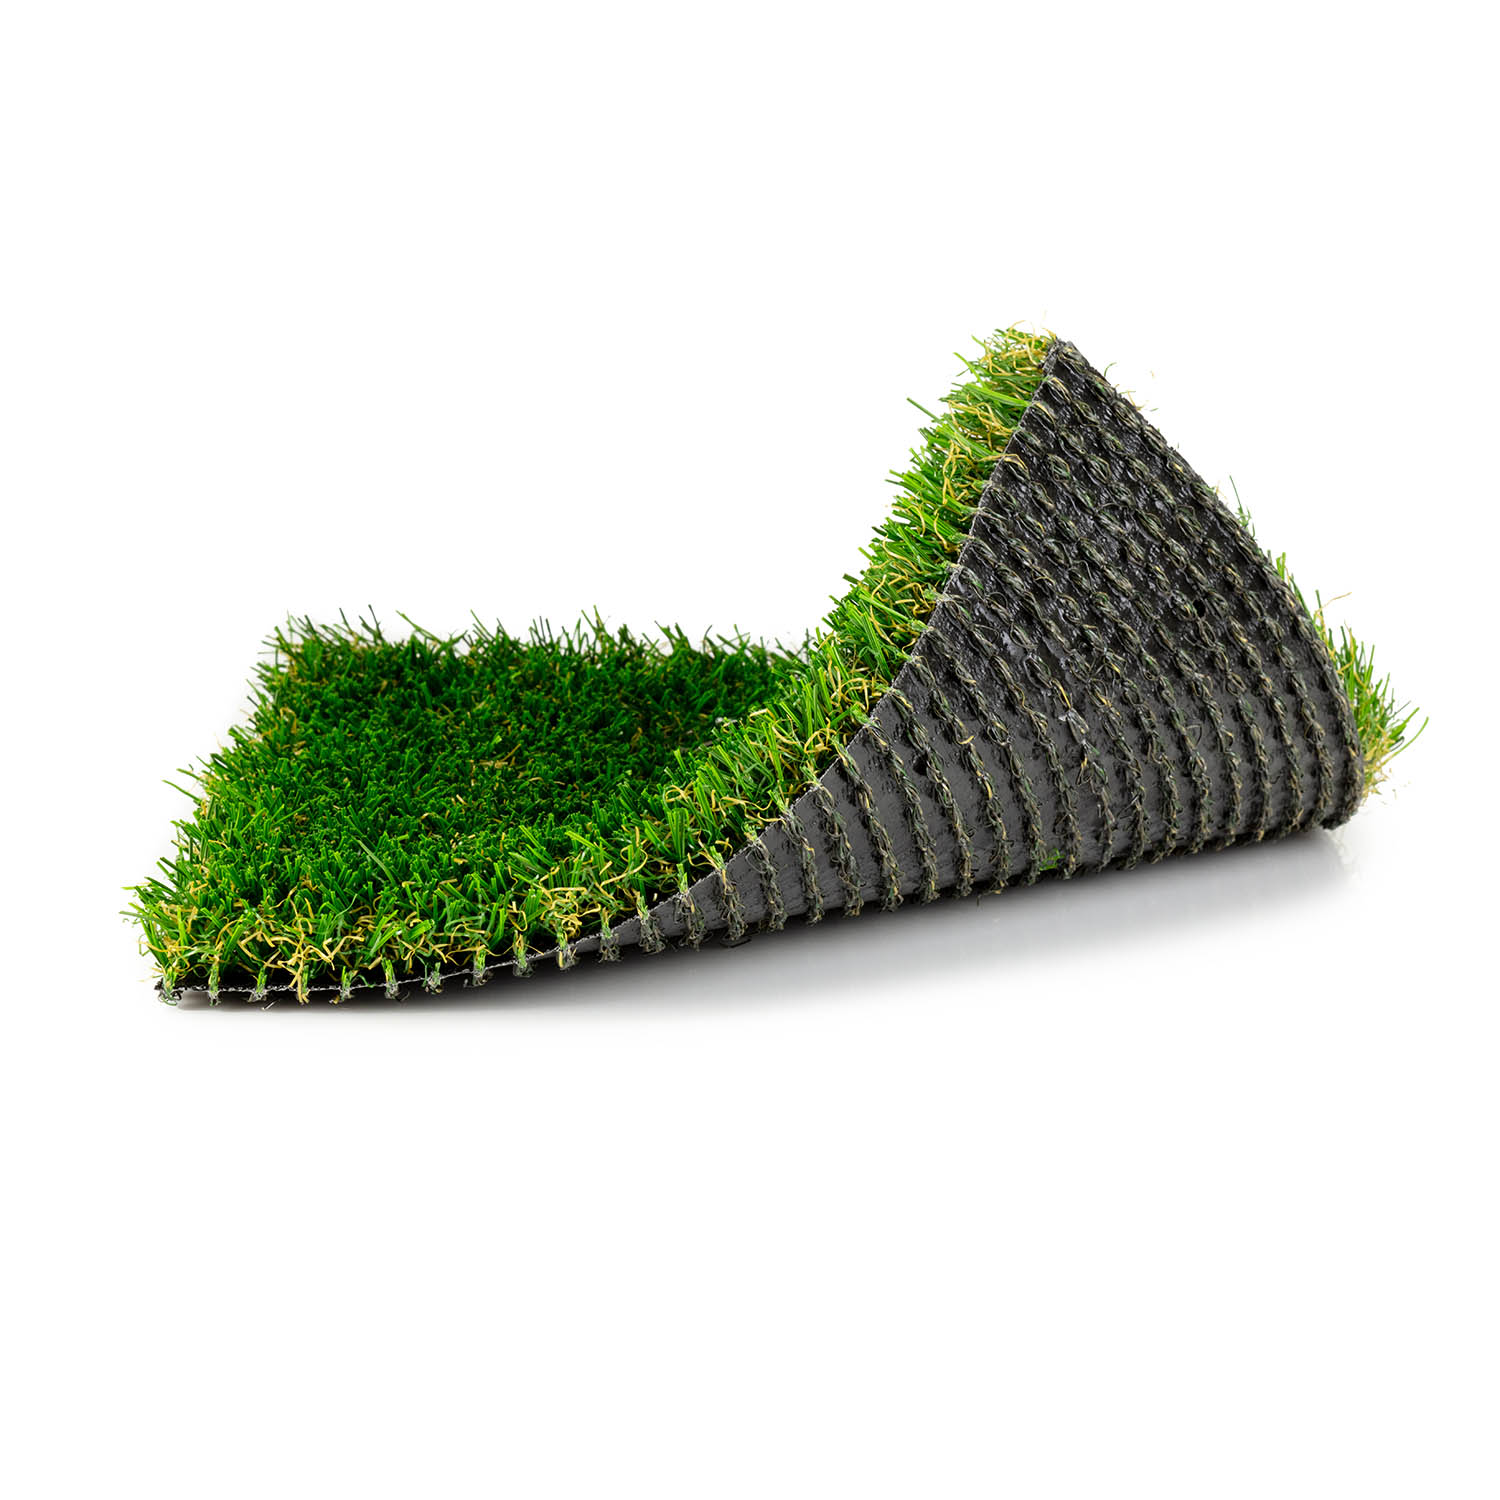 How Long Does Artificial Turf Last?